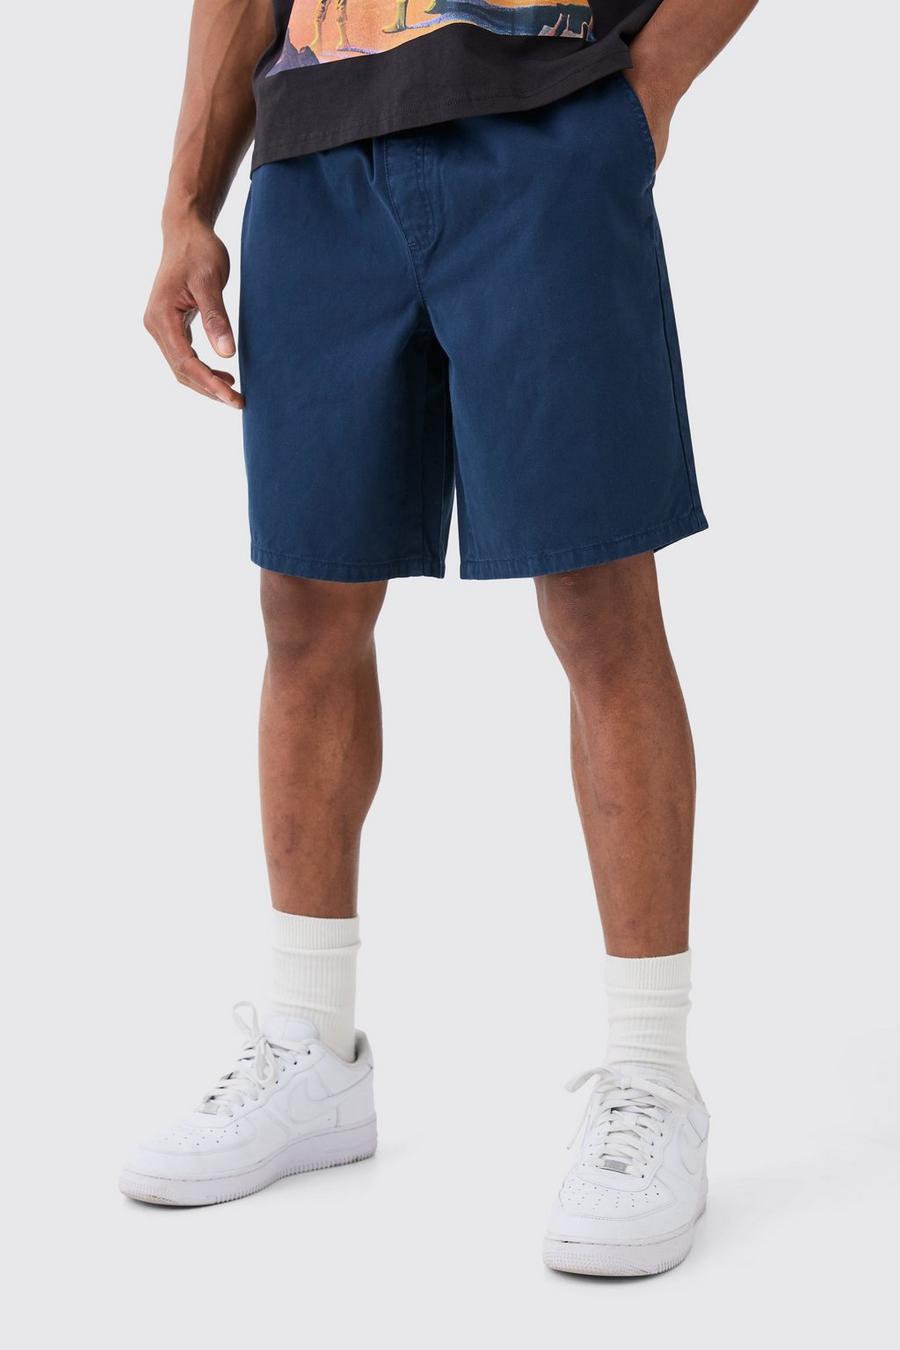 Relaxed Fit Elastic Waist Chino Shorts in Navy